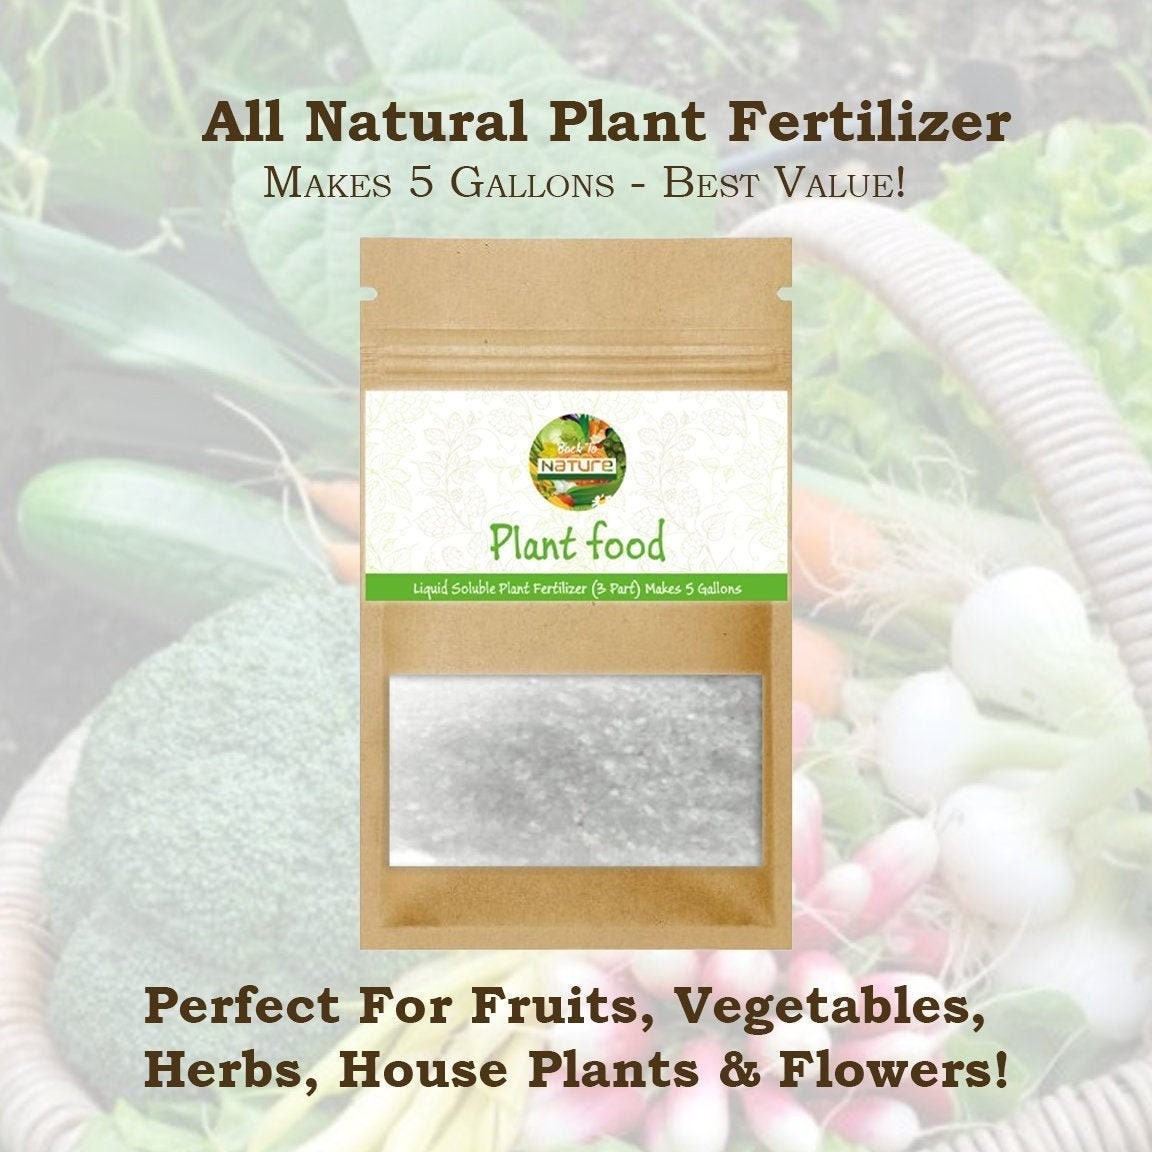 Plant Fertilizer - Grow Seeds - Vegetable Seeds - All Natural - Makes 5 Gallons - Liquid Soluble Plant Food - Grow Your Own Food At Home